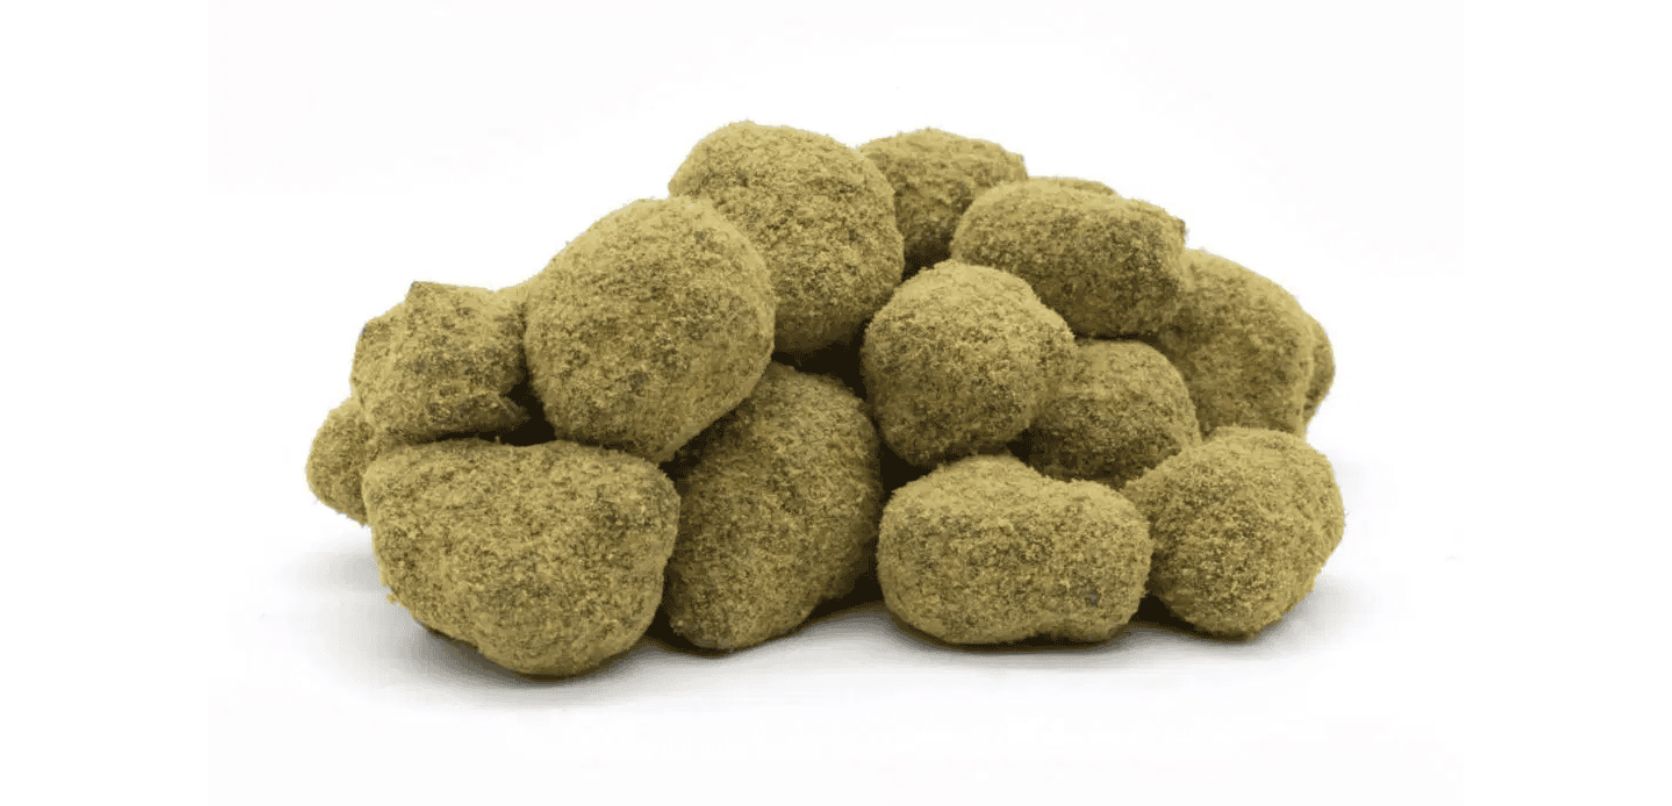 Moon Rocks are a super strong team of THC. They're made by covering cannabis buds with hash oil and then rolling them in kief. 